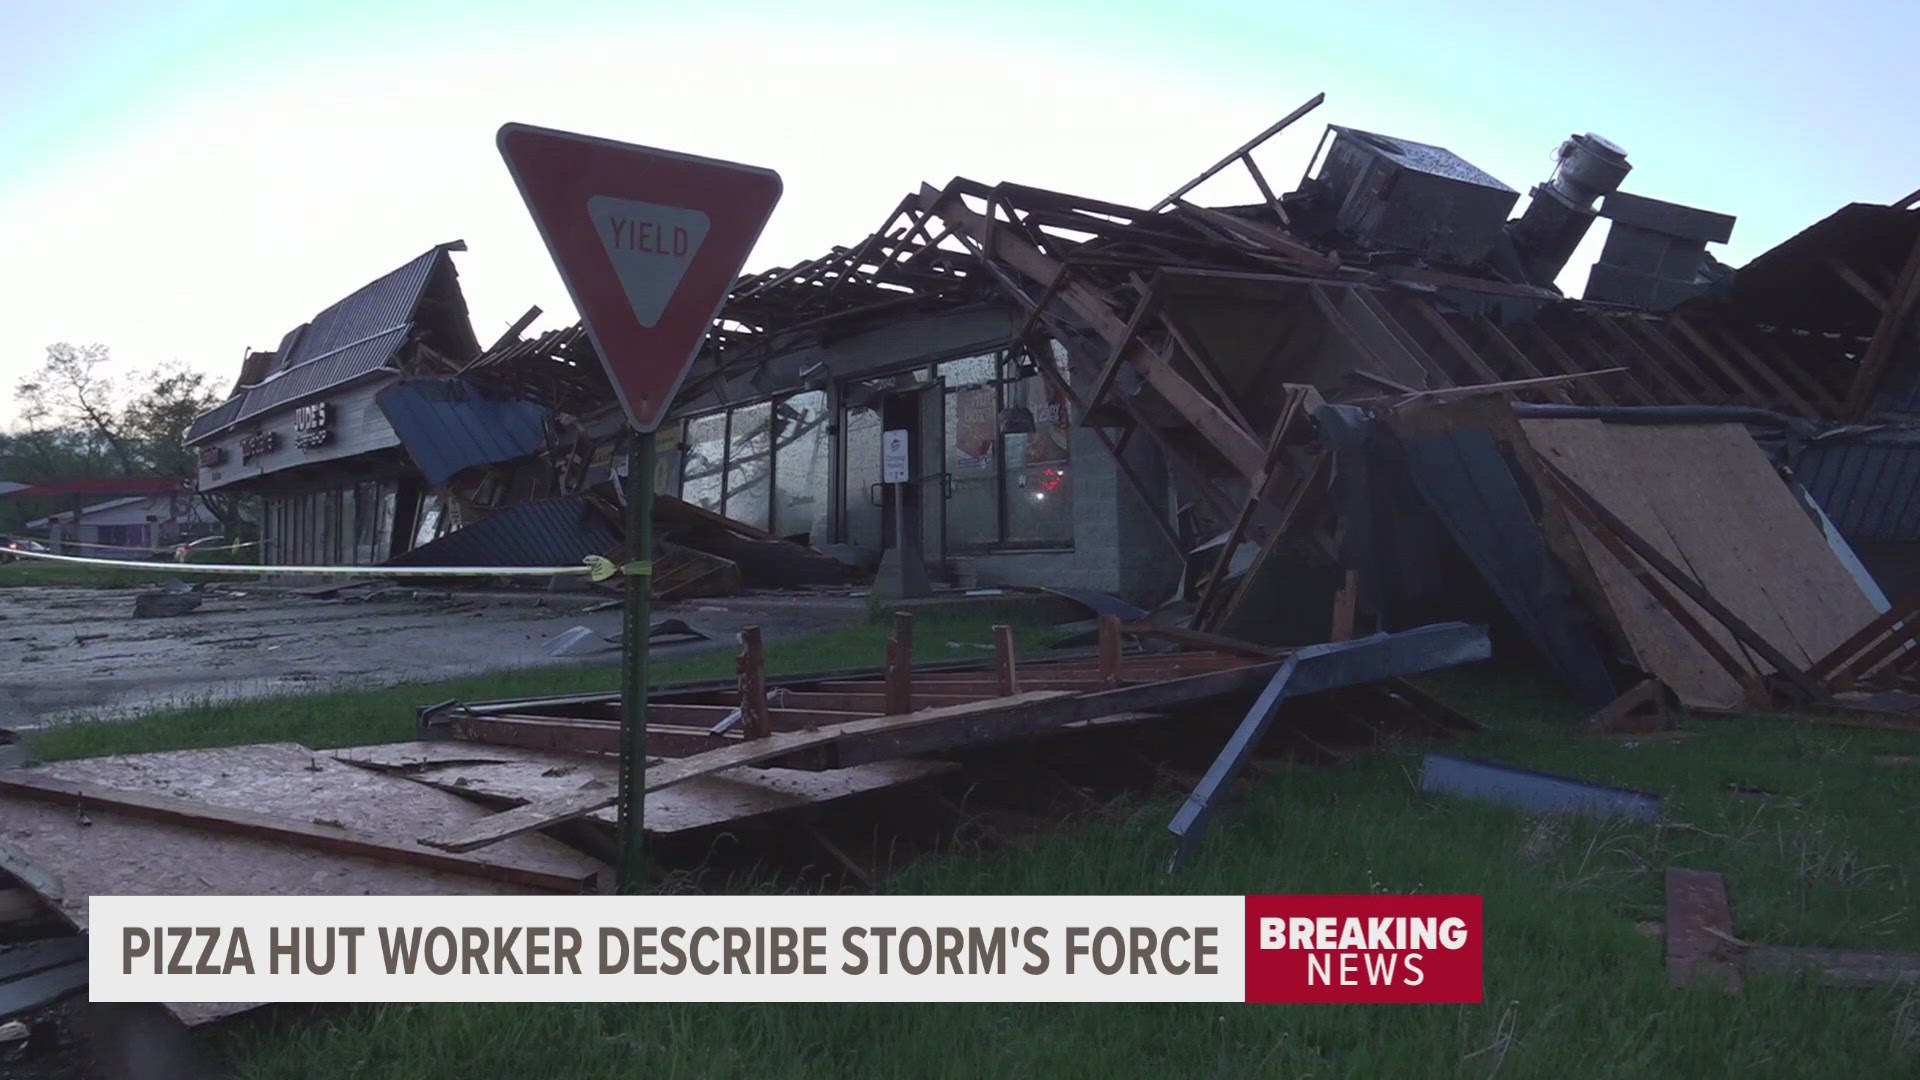 ​Employee Nate Davis said that he was rushing to get his coworkers into the walk-in freezer to shelter as the building began to be ripped apart.